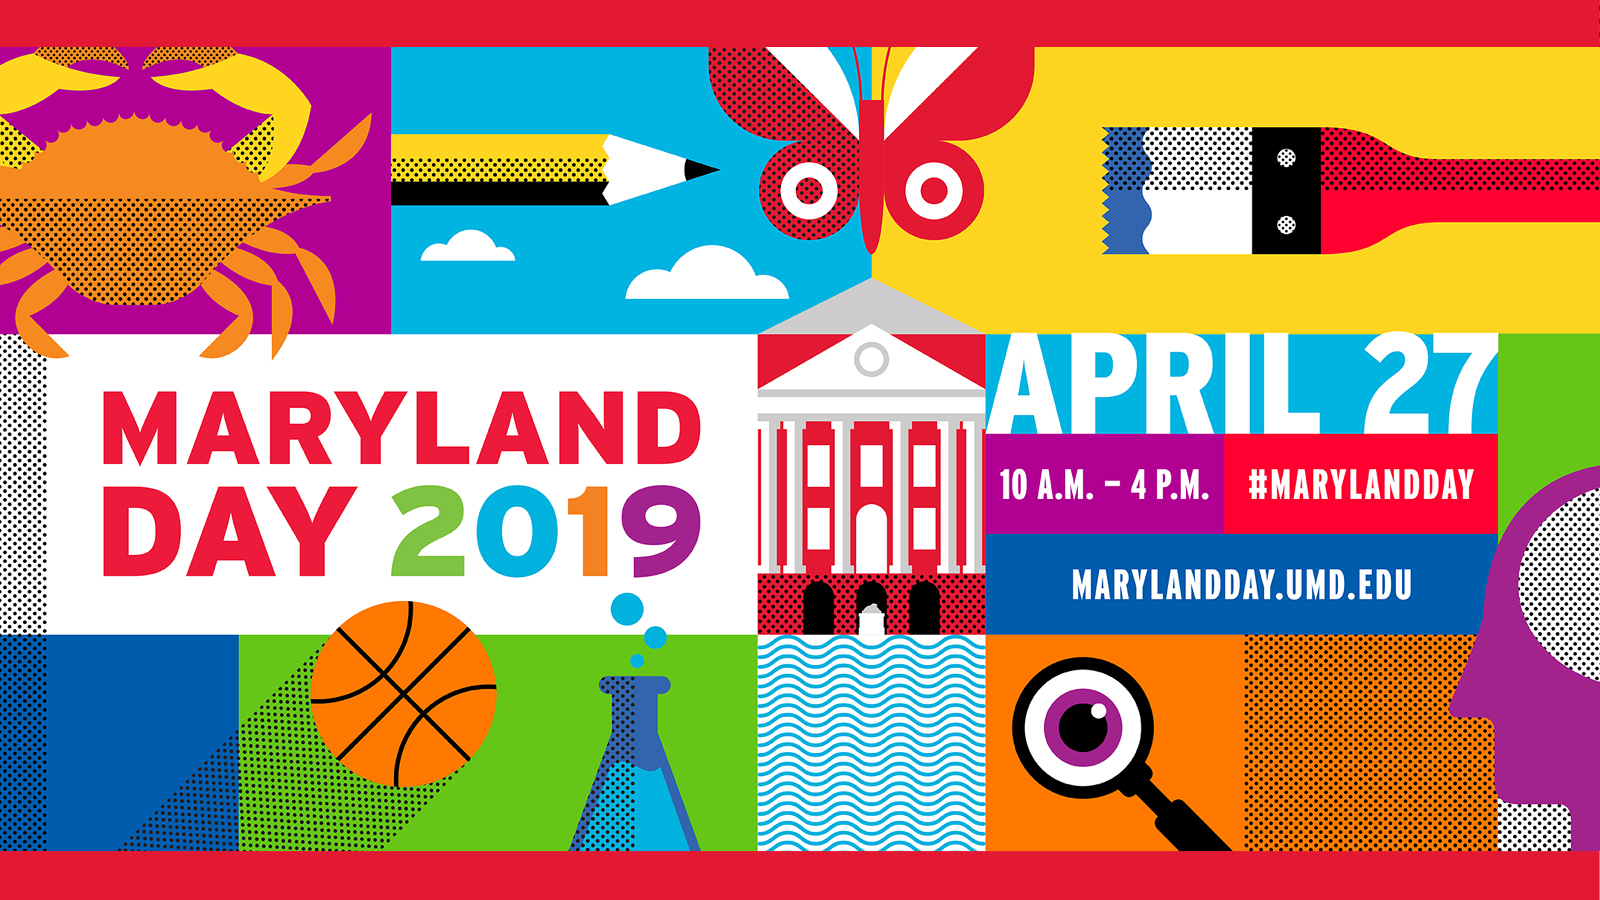 colorful illustrations surrounding Maryland Day event information